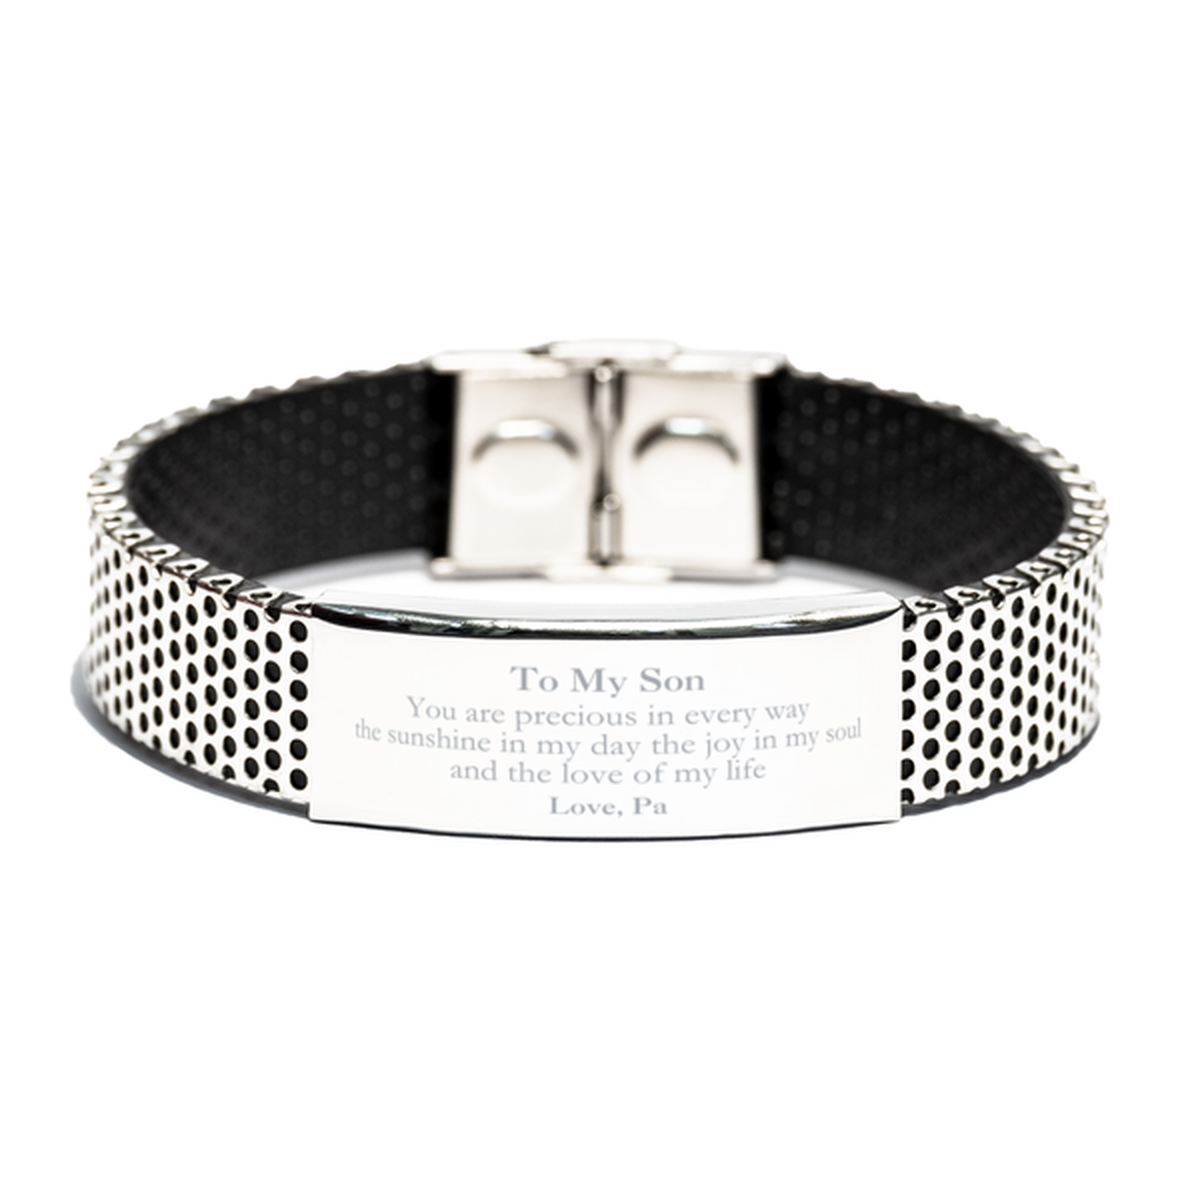 Graduation Gifts for Son Stainless Steel Bracelet Present from Pa, Christmas Son Birthday Gifts Son You are precious in every way the sunshine in my day. Love, Pa